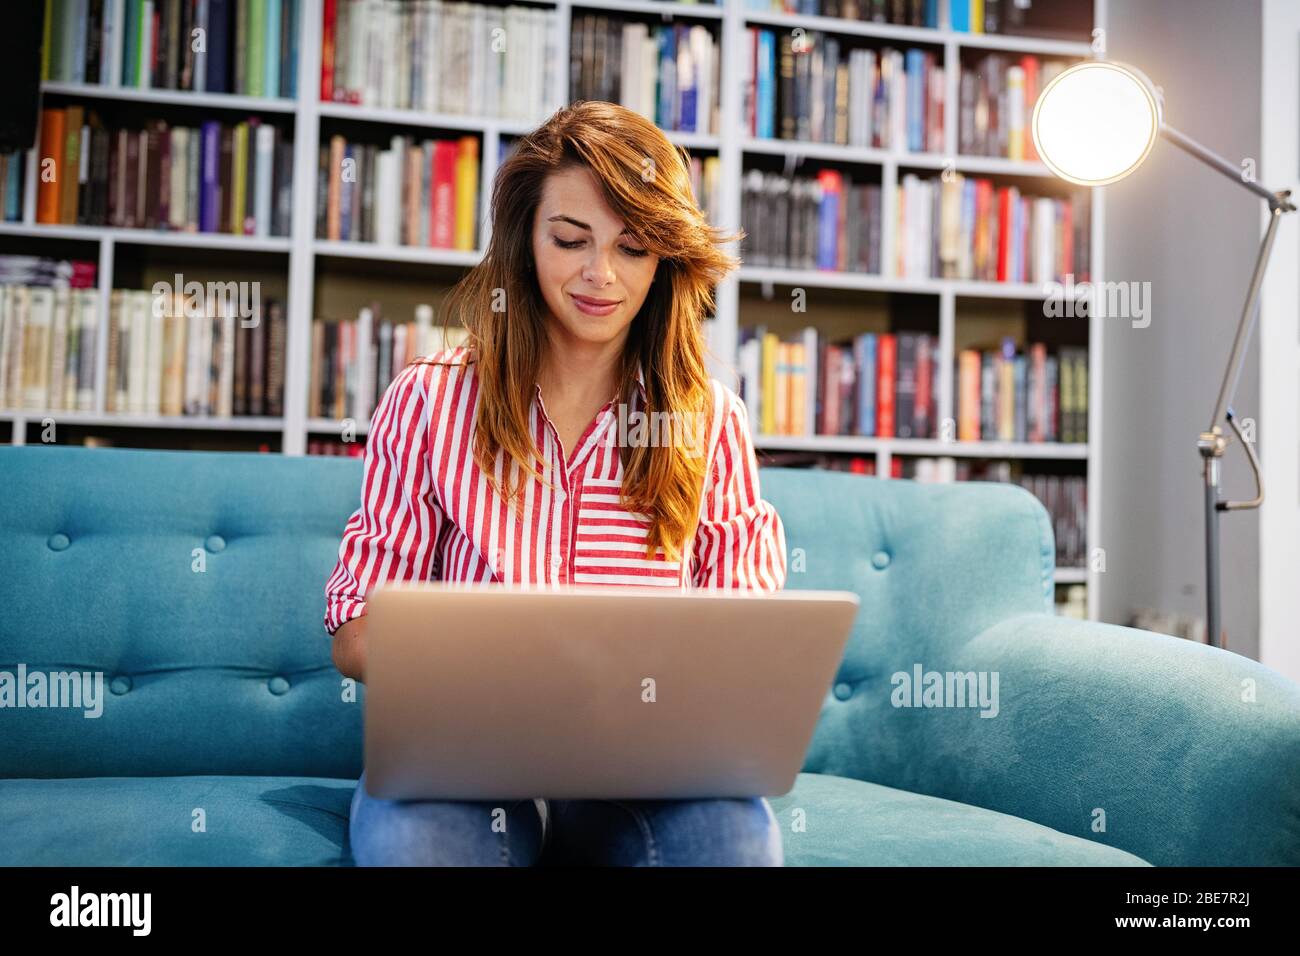 Portrait of happy student woman working on laptop Stock Photo